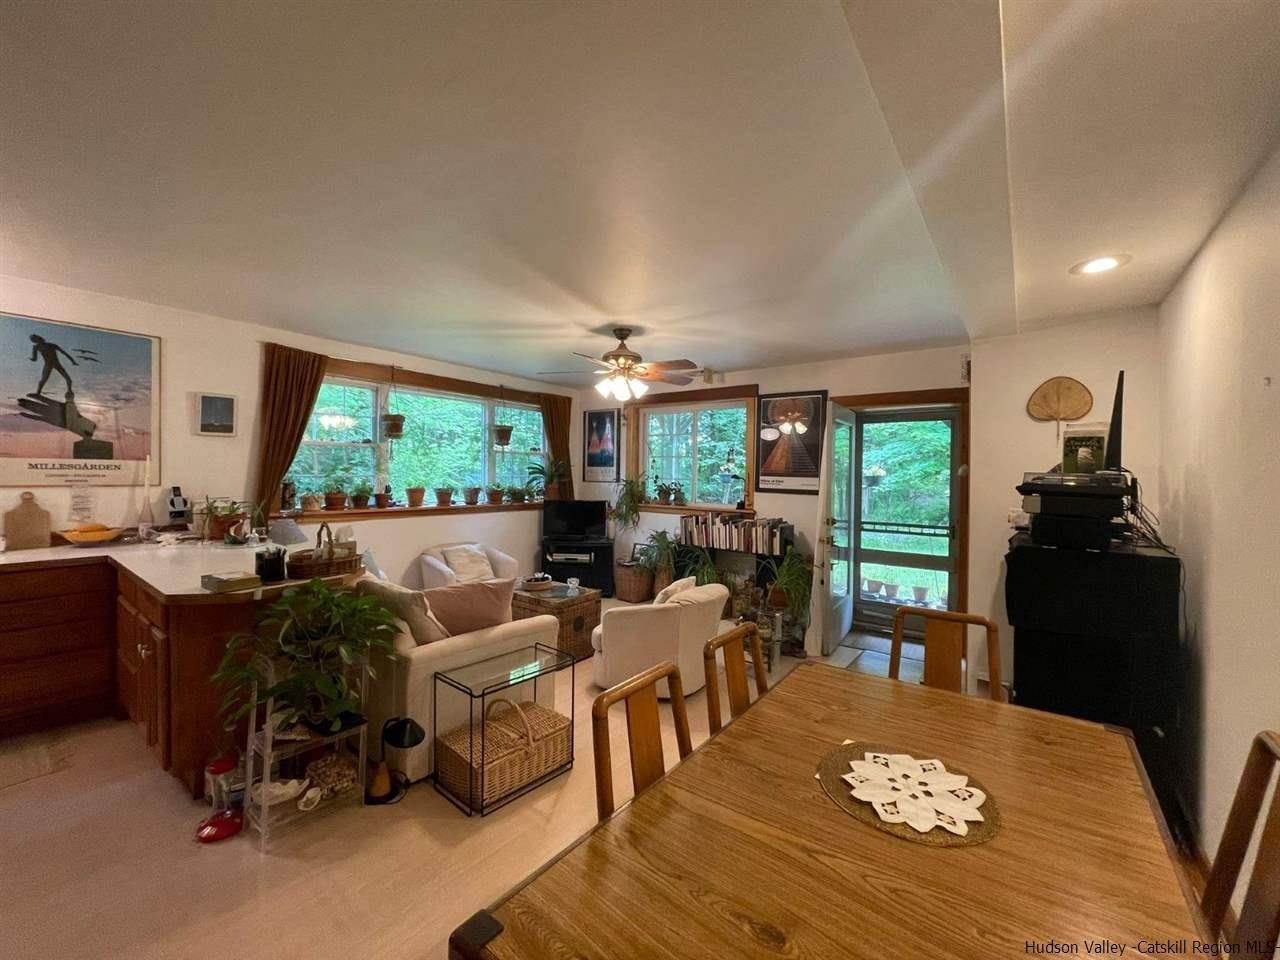 8. Two Family for Sale at 2259 Glasco turnpike Woodstock, New York 12498 United States